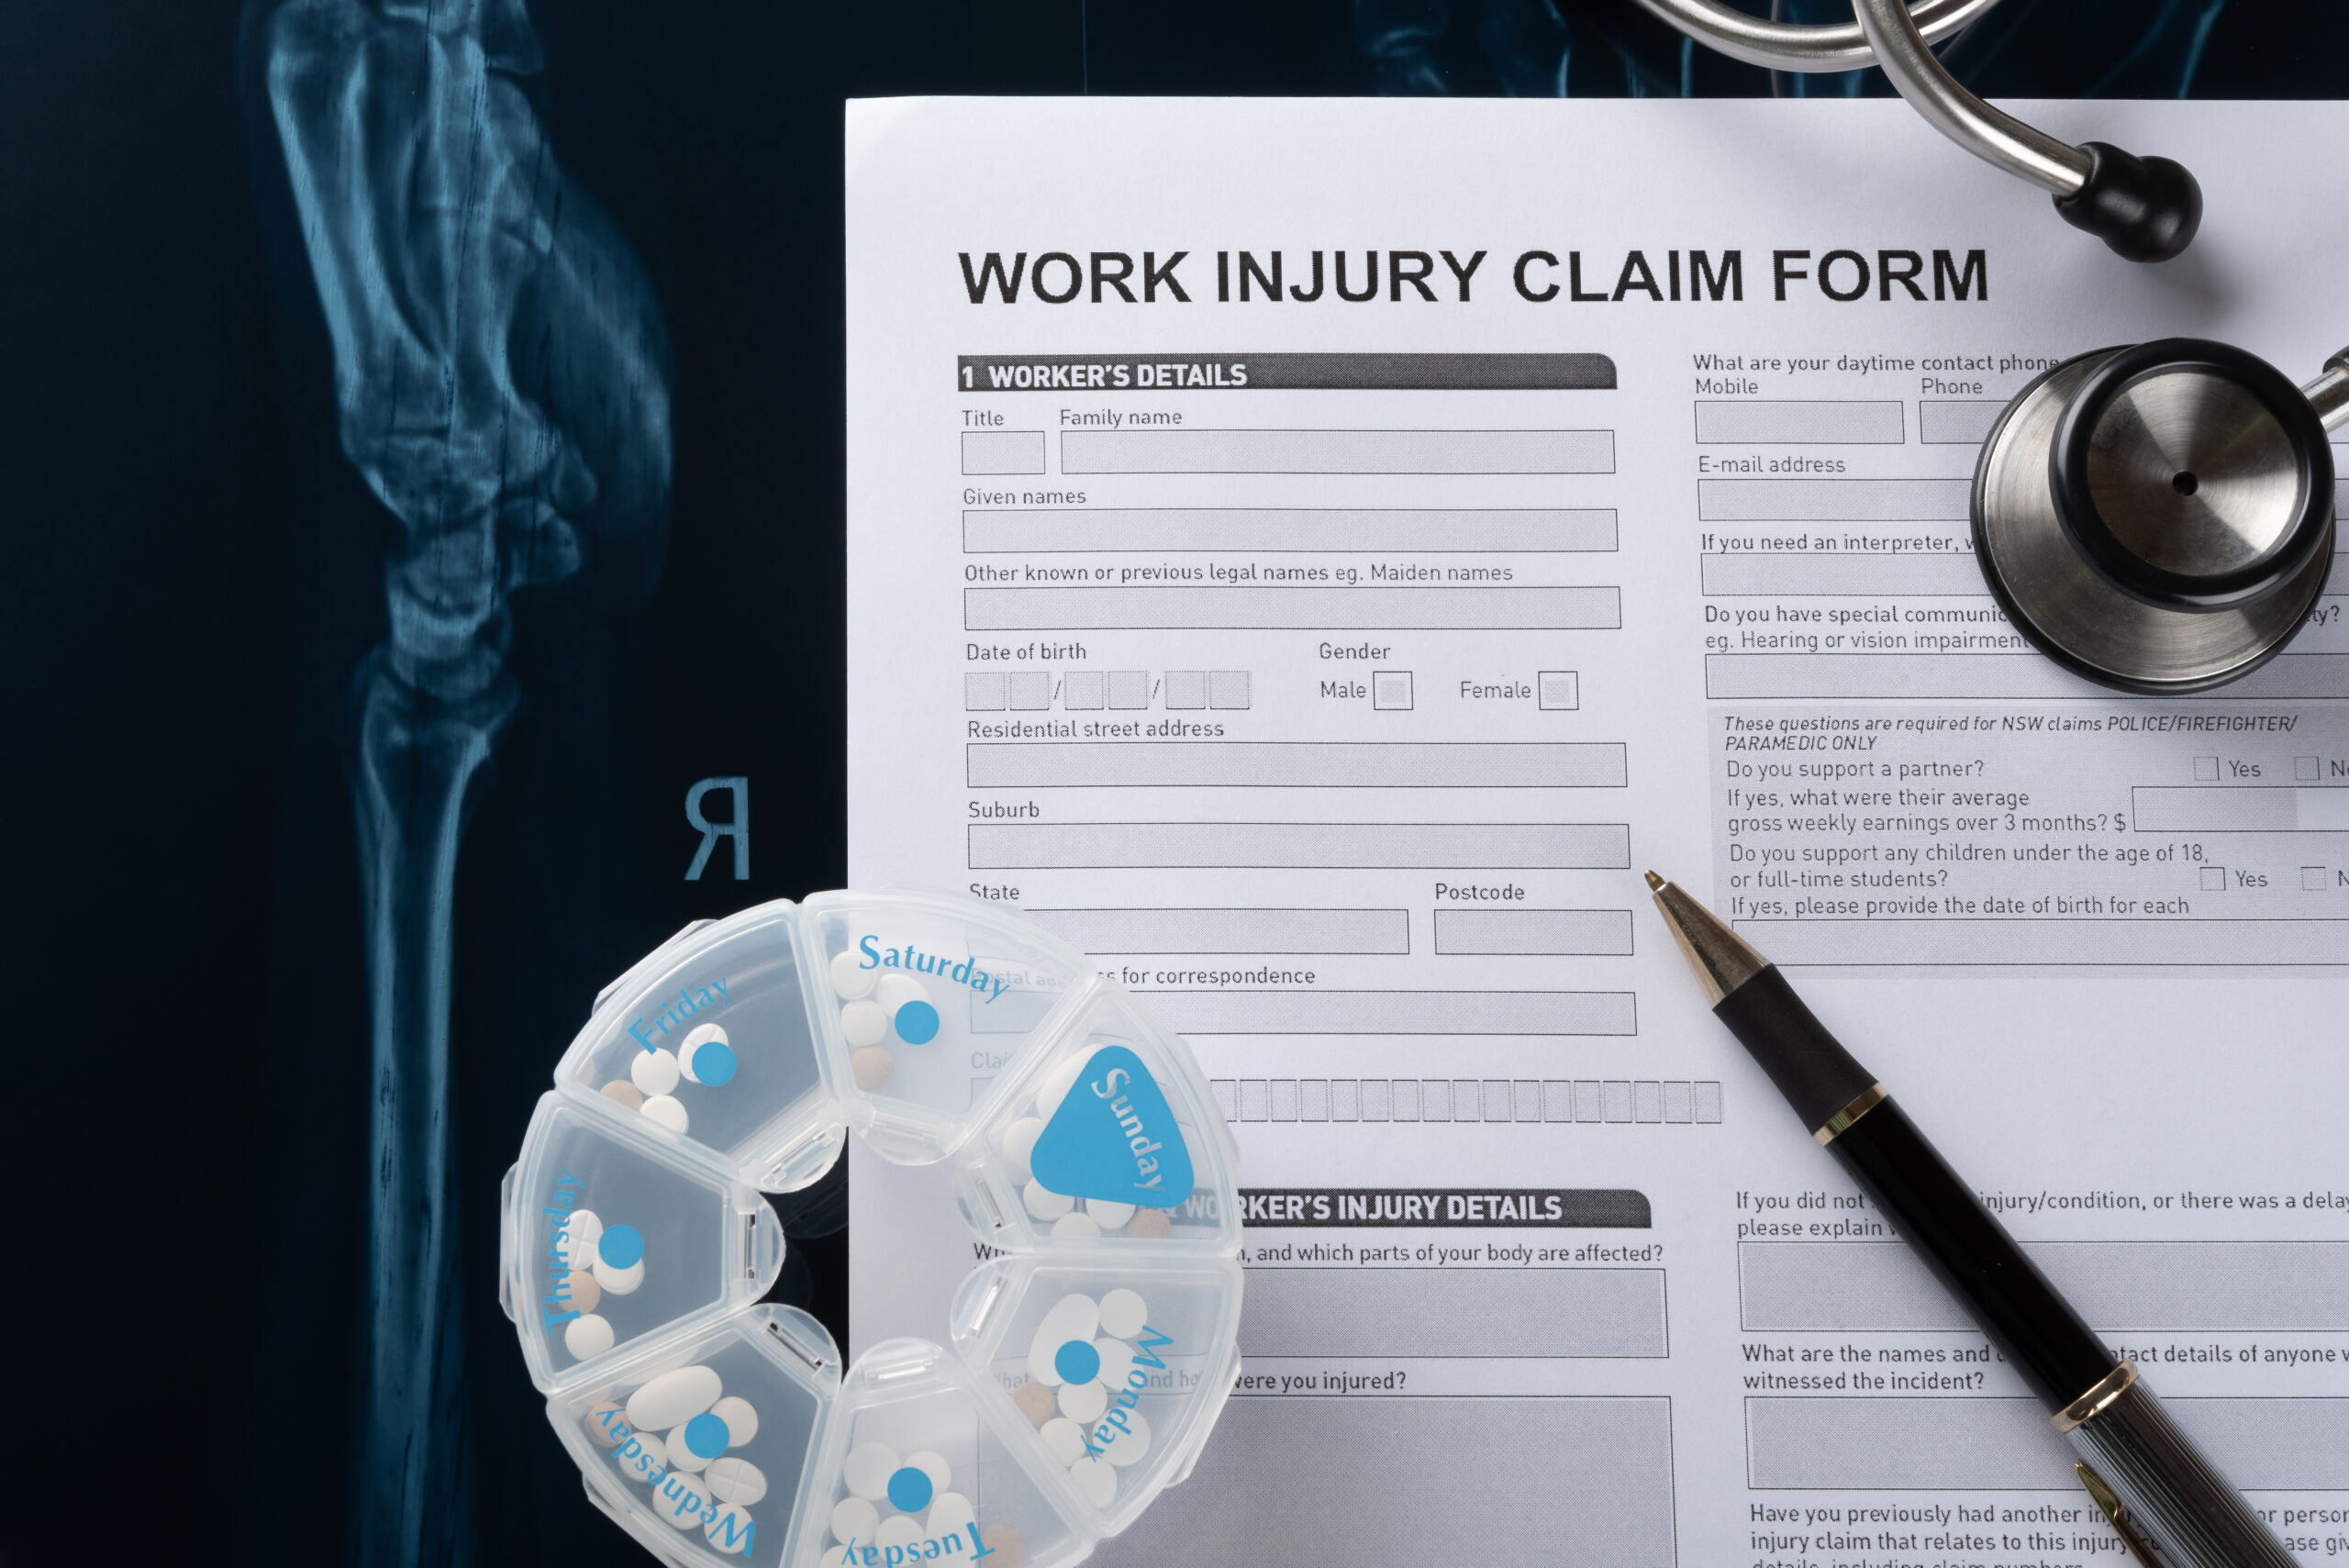 workers' compensation claim